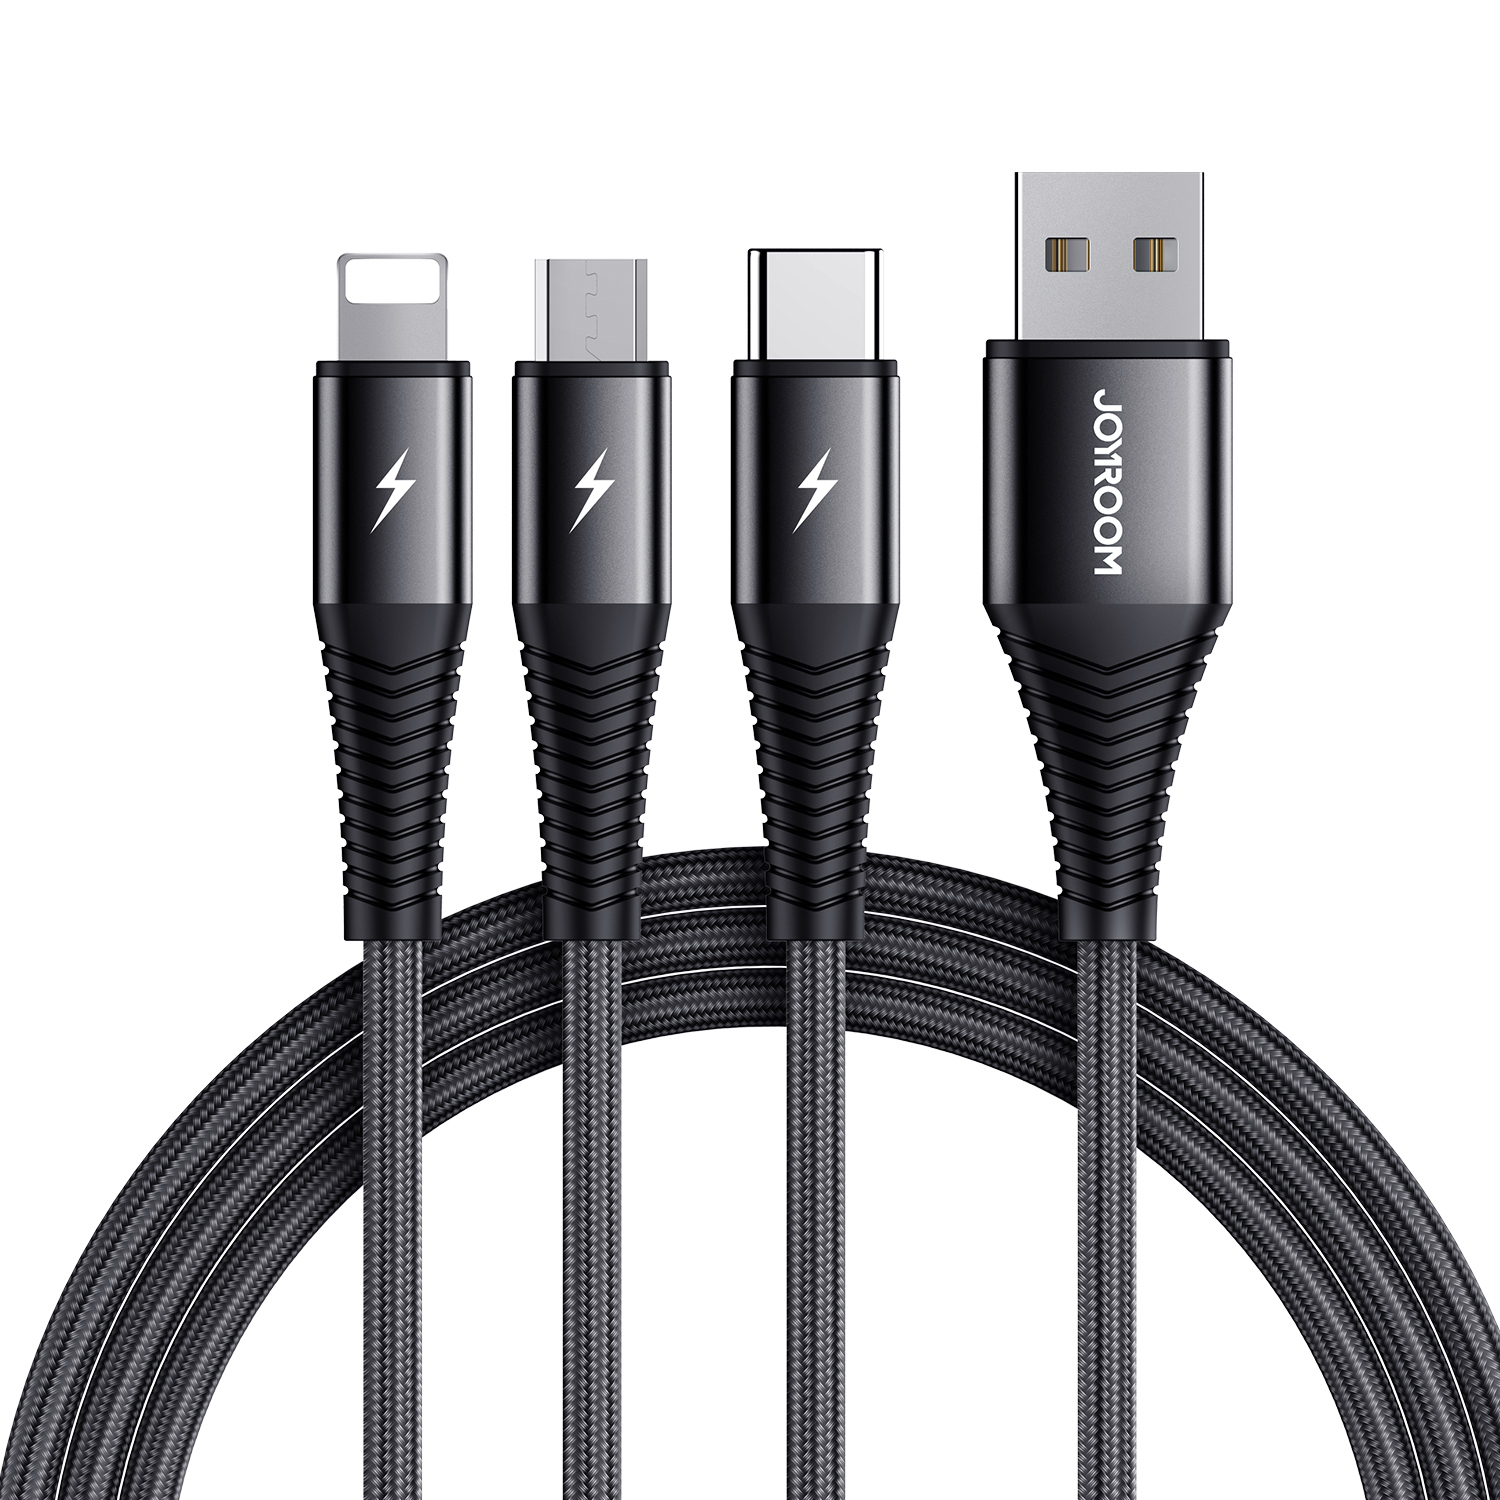 3 in 1 Phone Charging Cable Cable Joyroom For iPh iPad Samsung Android Black